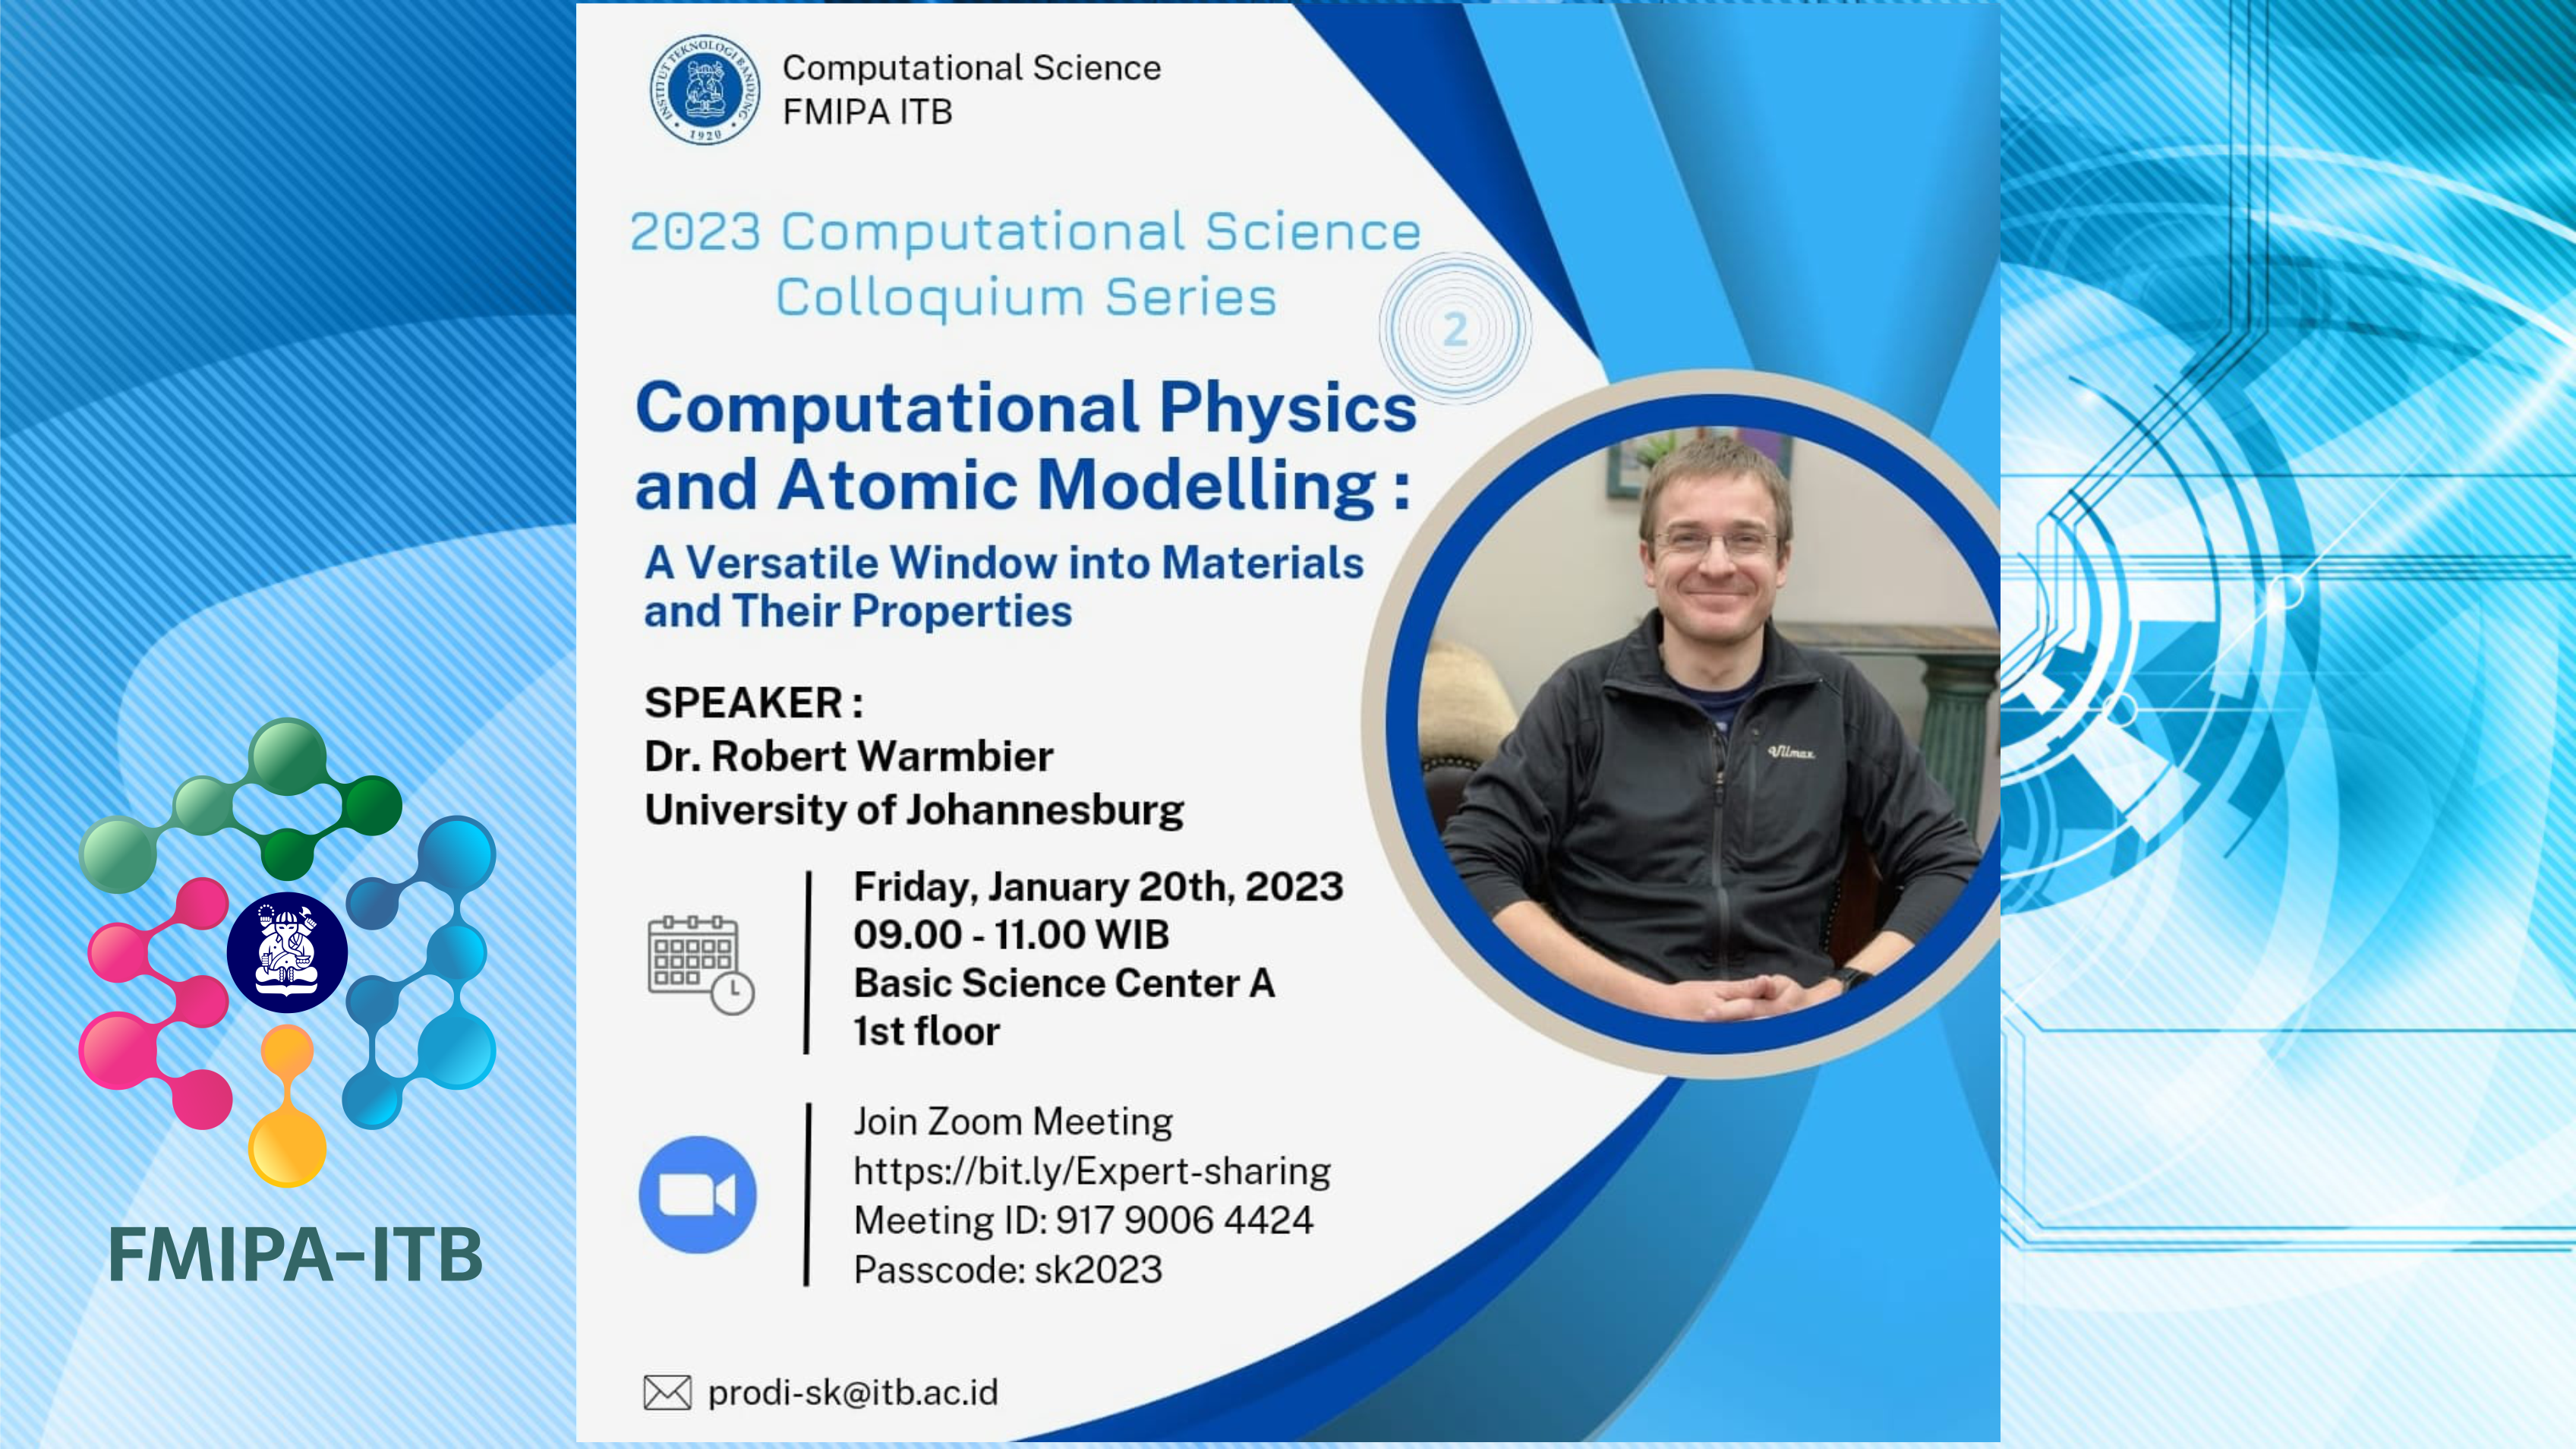 2023 Computational Science Colloqium Series Computational Physics and Atomic Modelling: A Versatile Window into Materials and Their Properties, Dr. Robert Wambrier (University of Johannesburg)